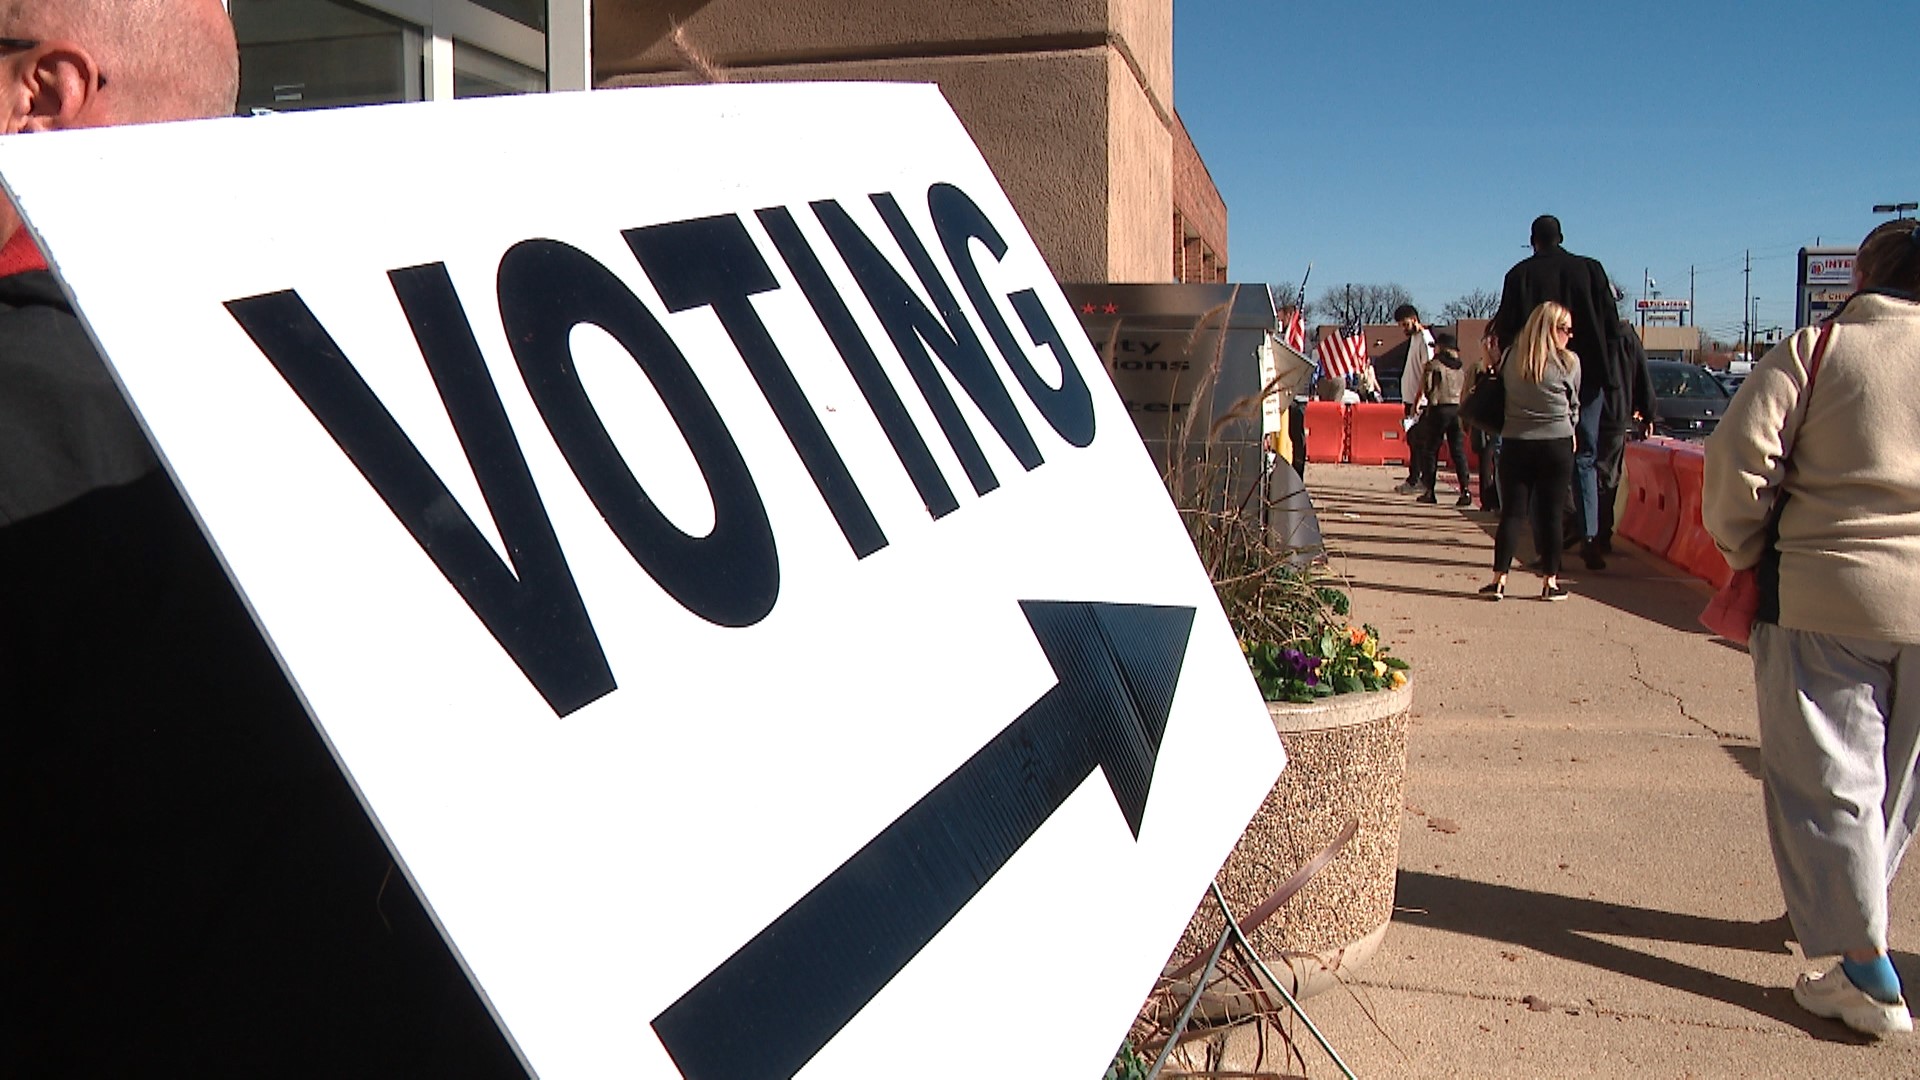 Franklin County officials expect to see about 20% of registered voters participate in the election.